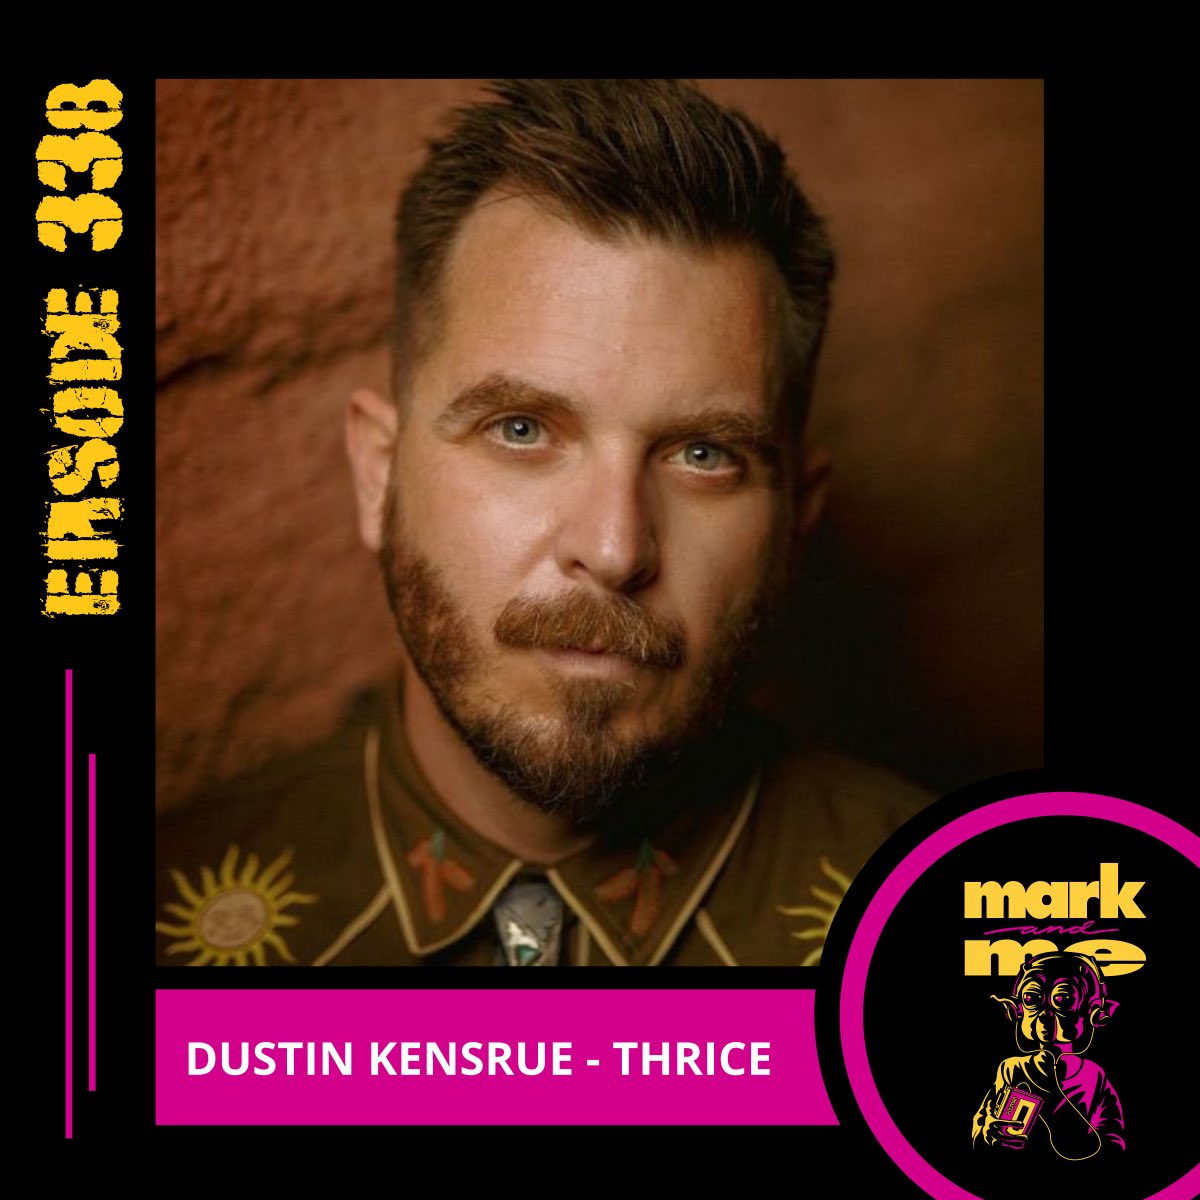 Episode 338 is out now. I’m joined by @dustinkensrue from @Thrice You can listen now on Apple Podcasts, Amazon Music, Spotify or over at markandme.com I hope you all enjoy #podcast #markandme #interview #thrice